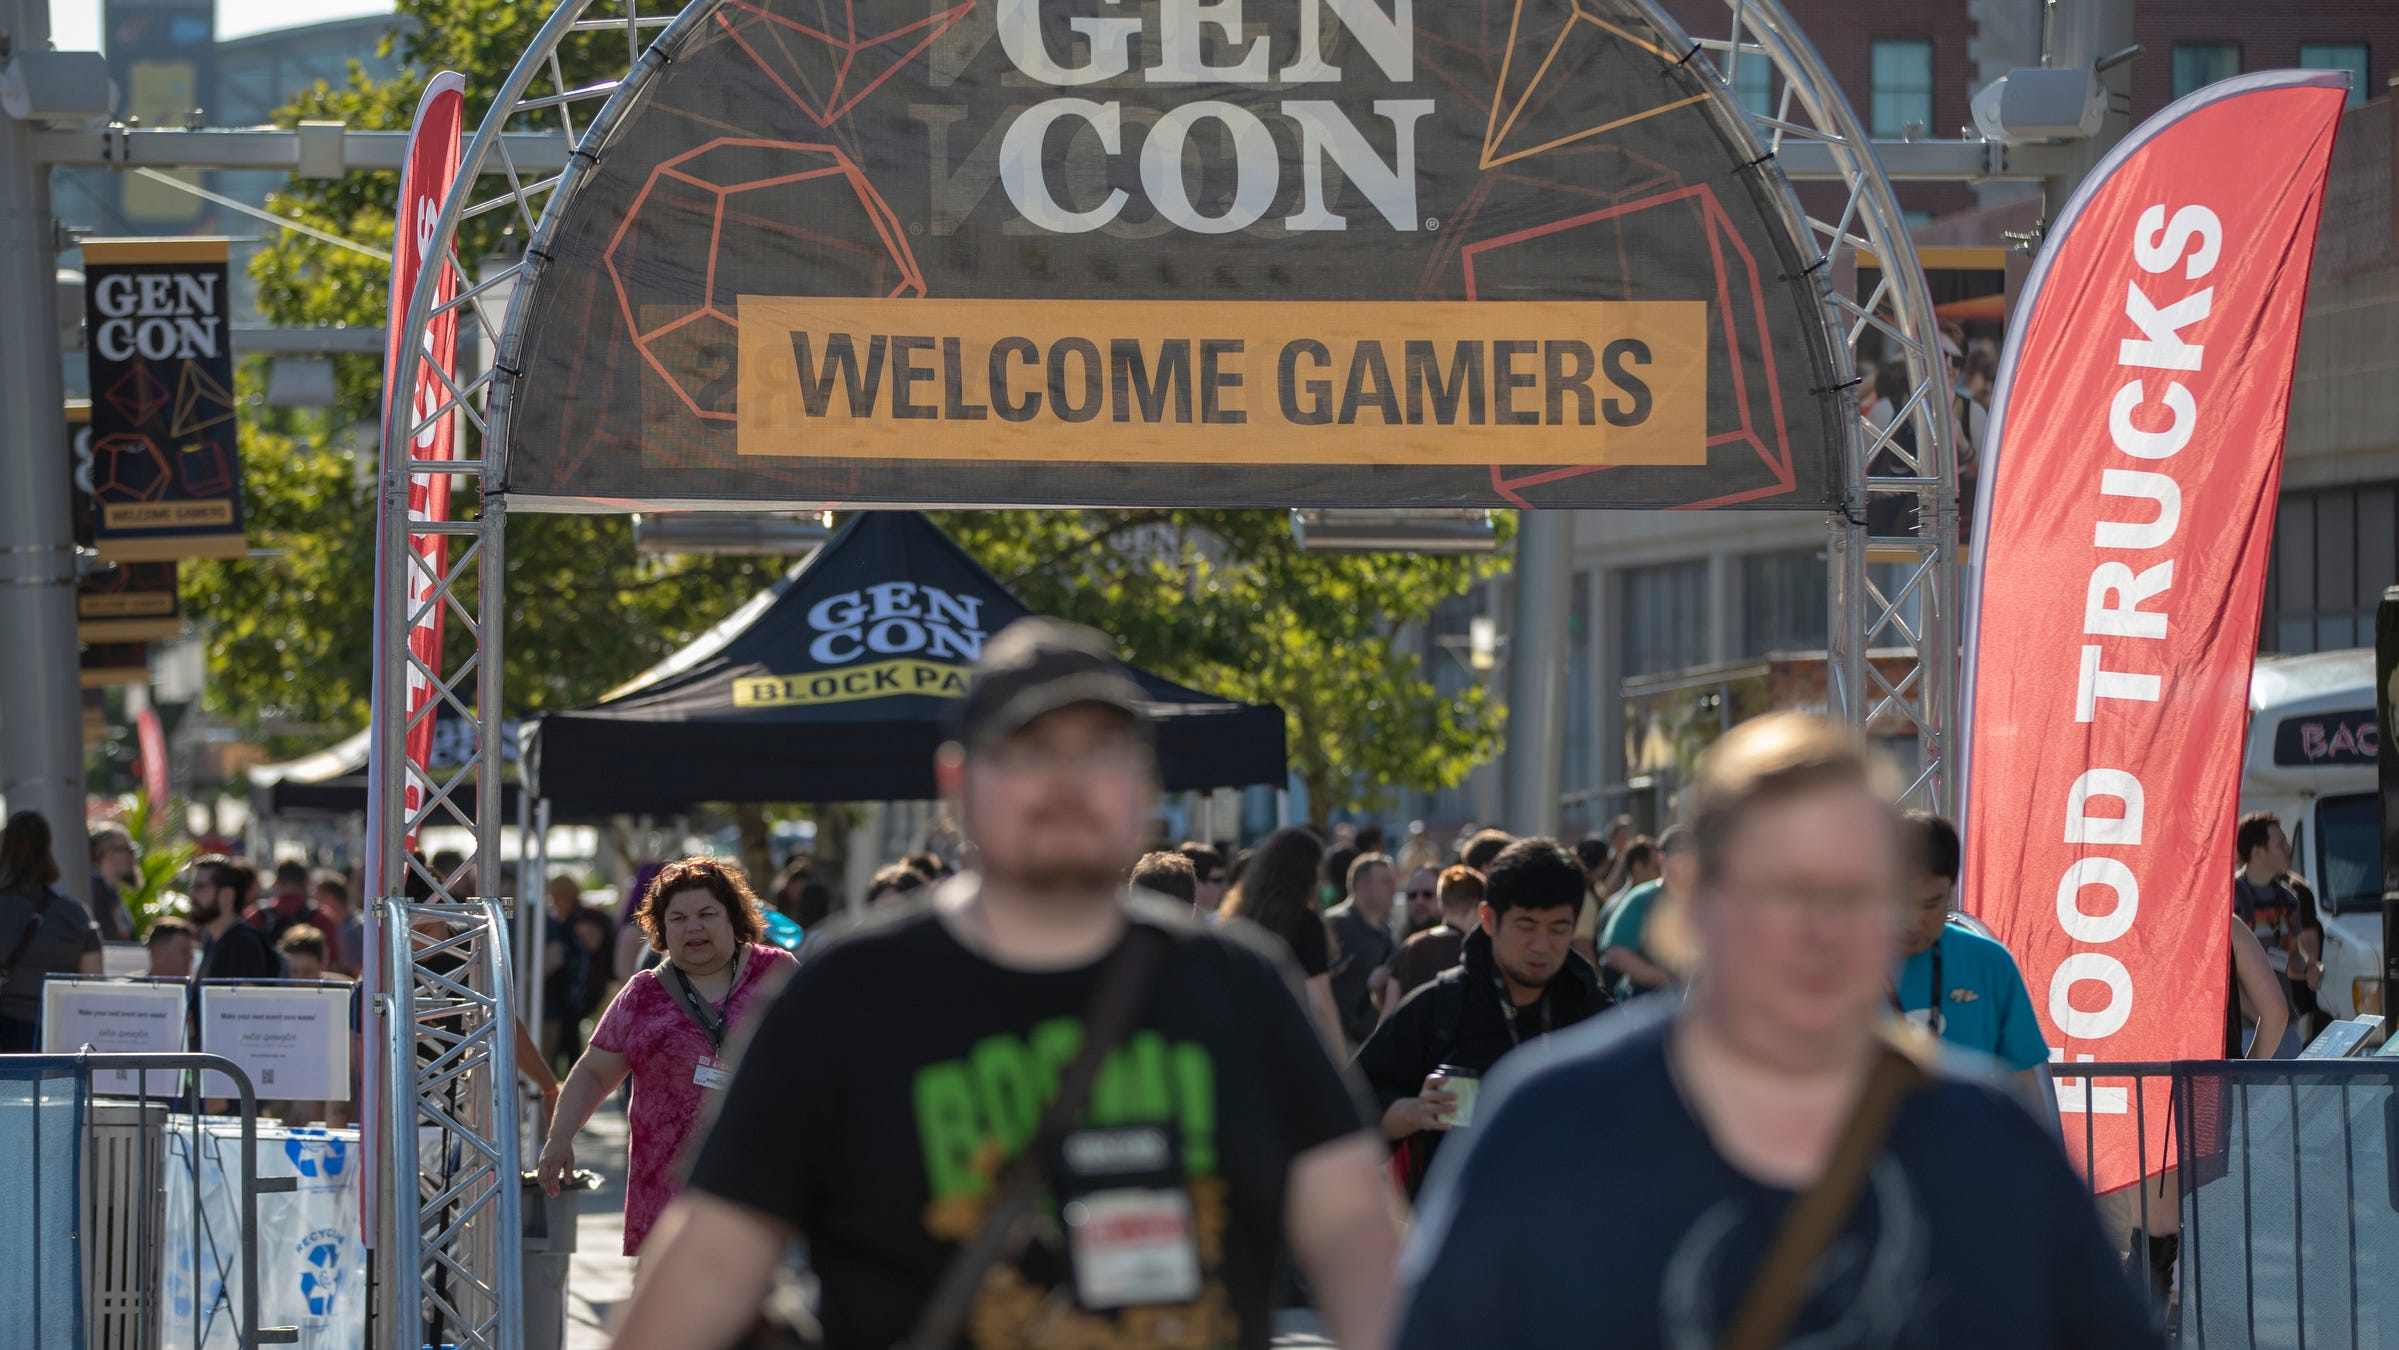 Gen Con 2020 canceled; contact with Indianapolis extended